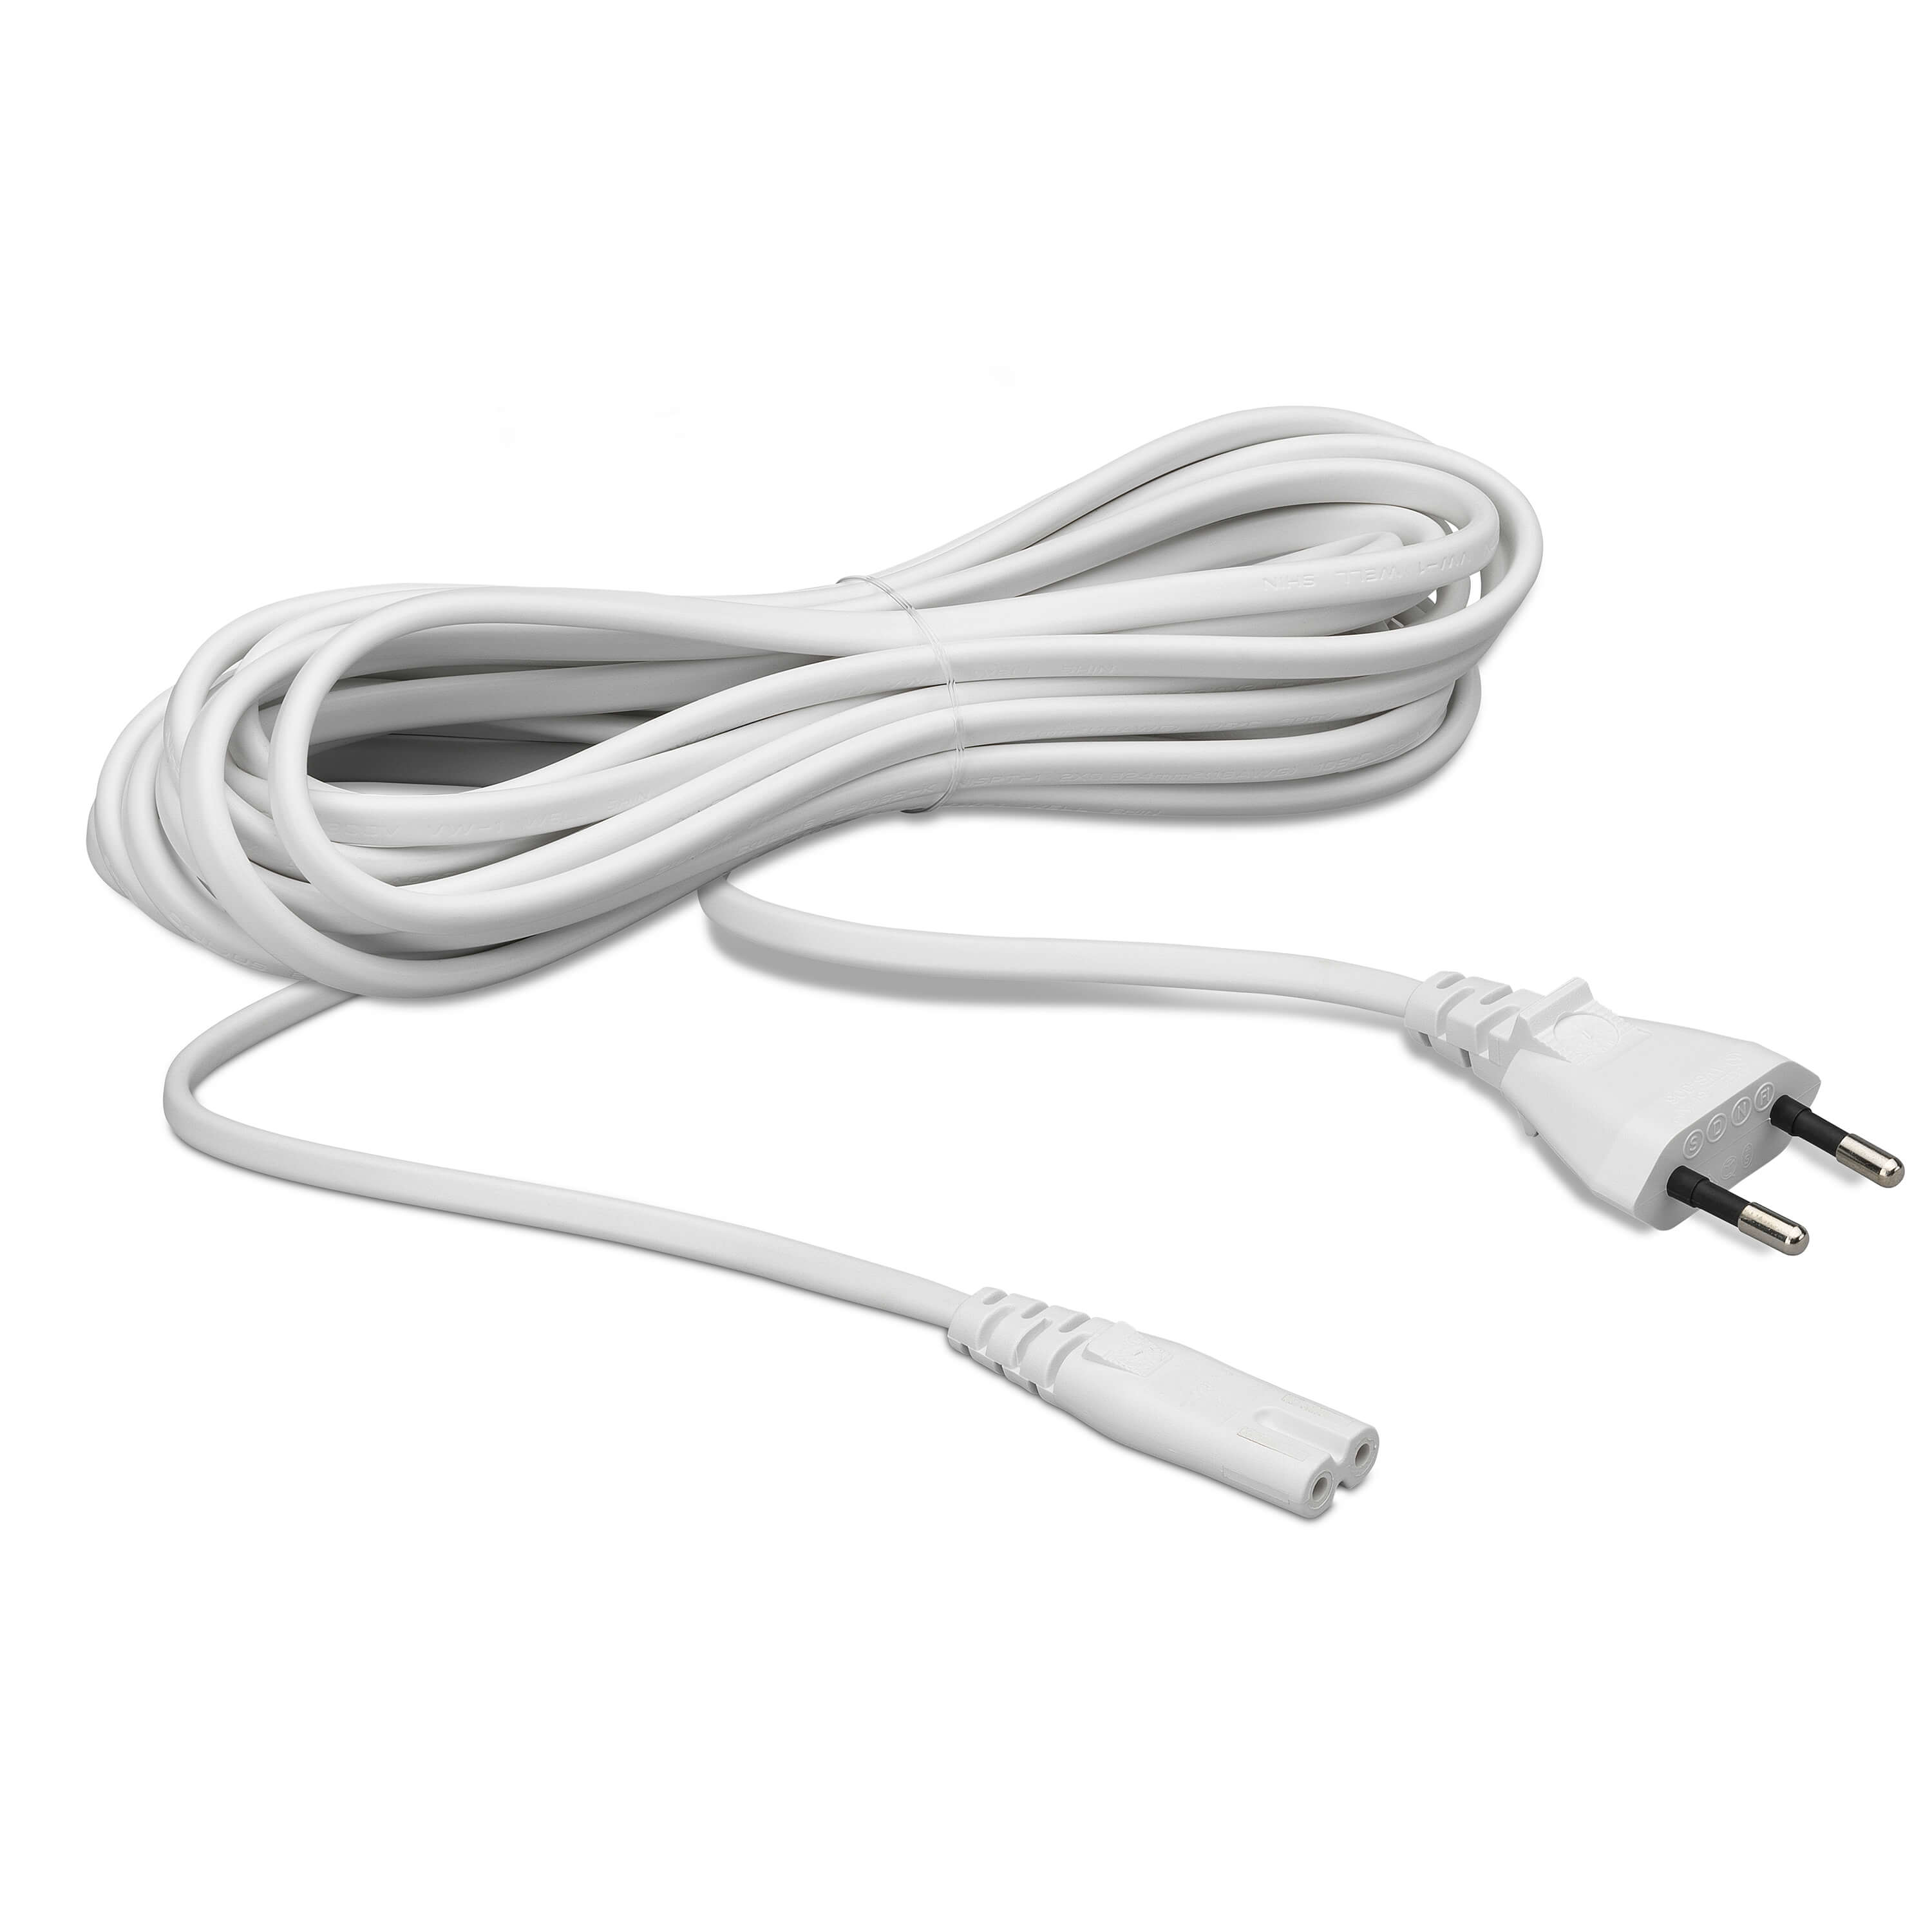 5M Power Cable for Sonos Speakers EU - White Single